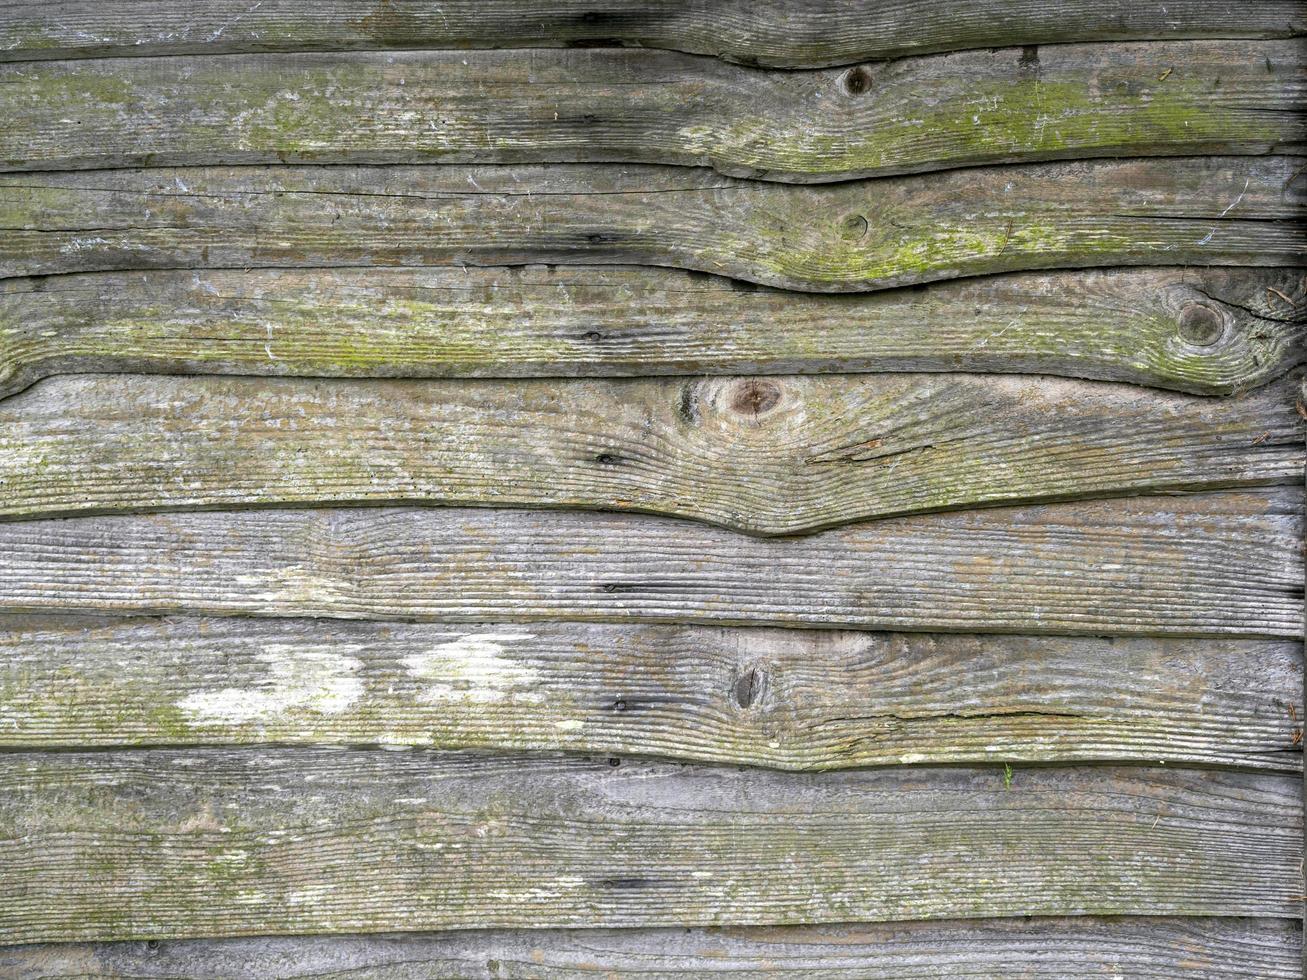 Wood slats on an old mouldy garden fence photo